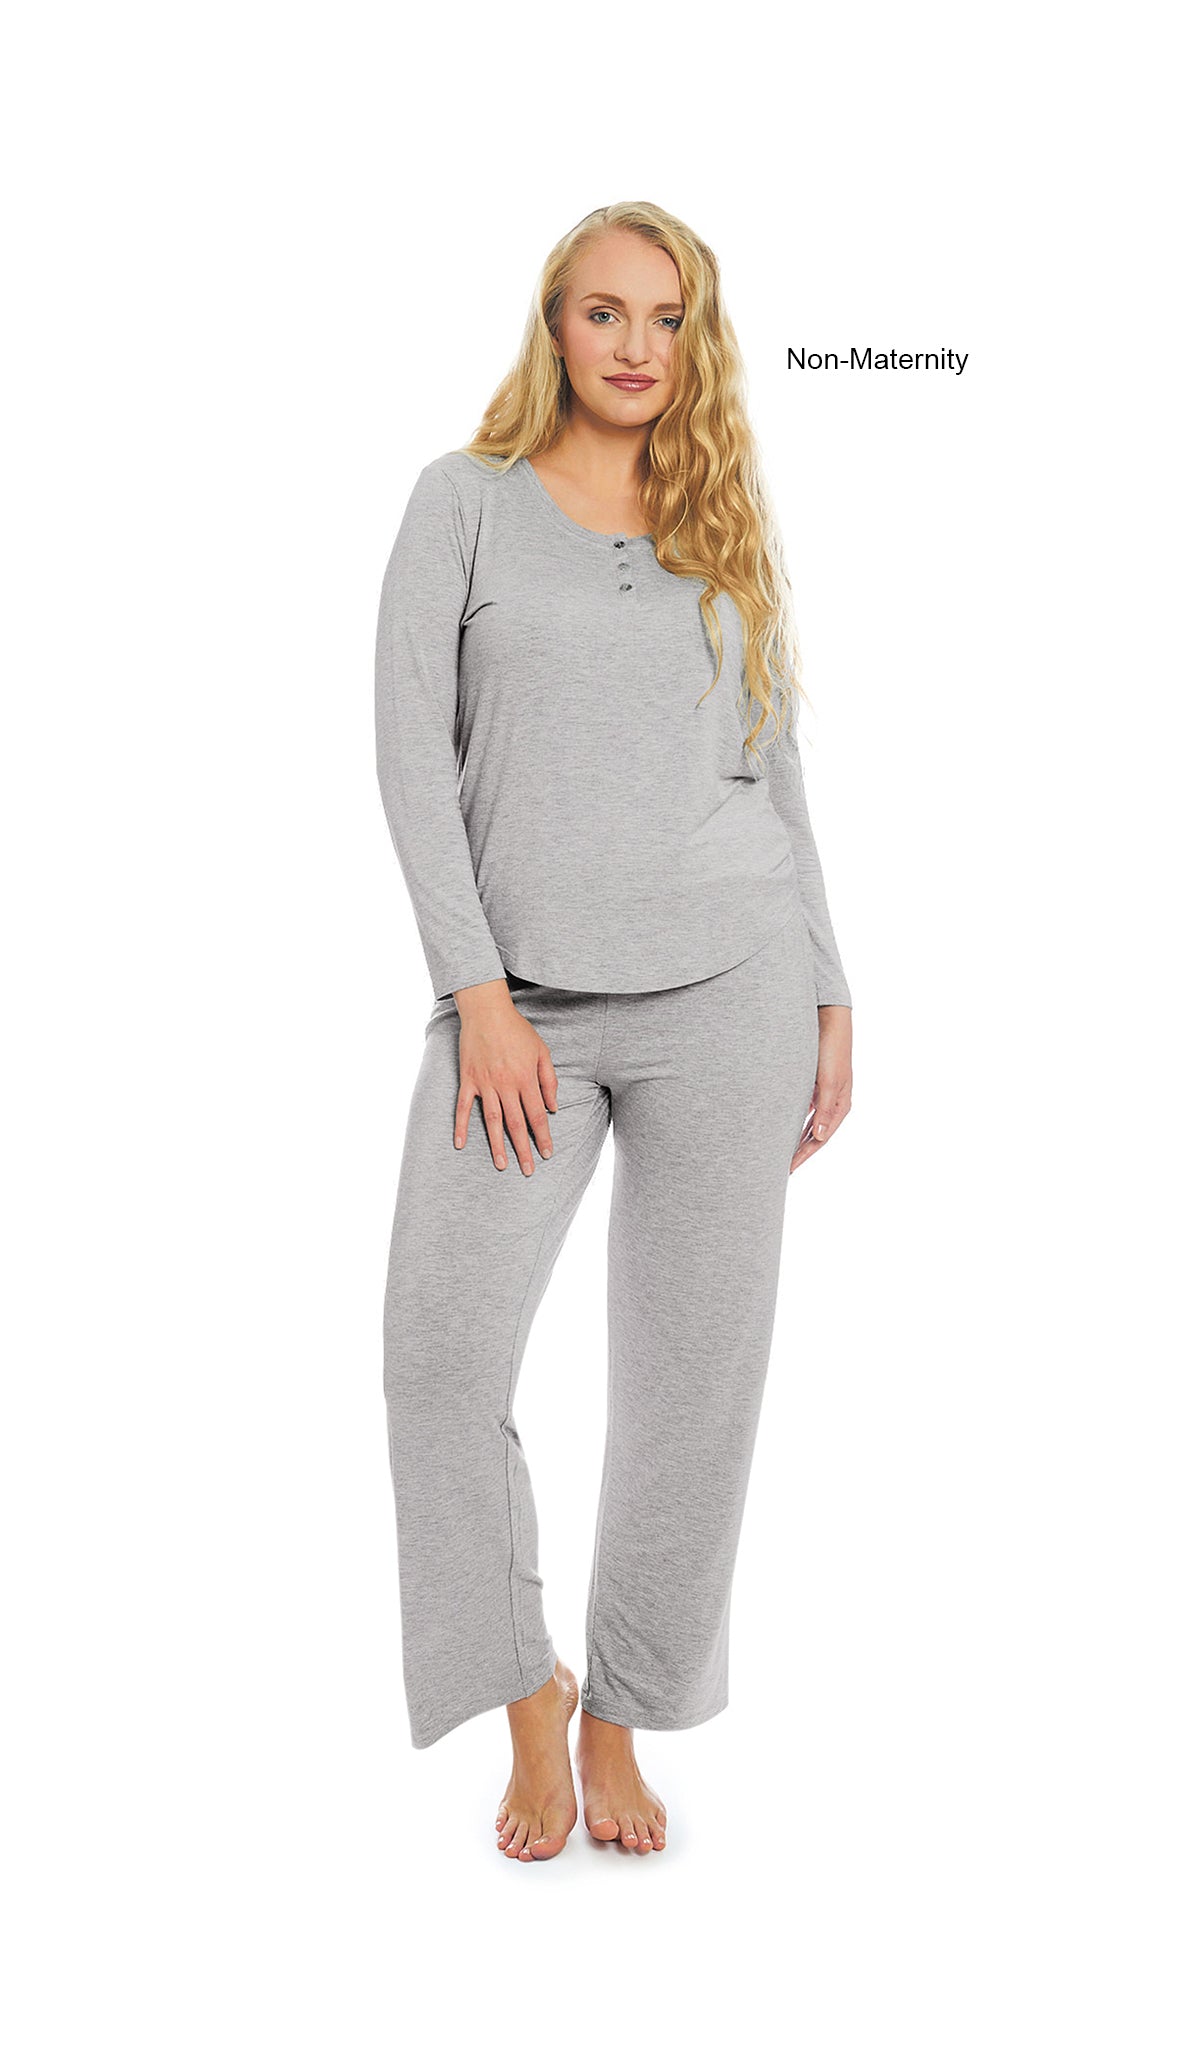 Heather Grey Solid Laina 2-Piece Set. Woman wearing button front placket long sleeve top and pant as non-maternity.